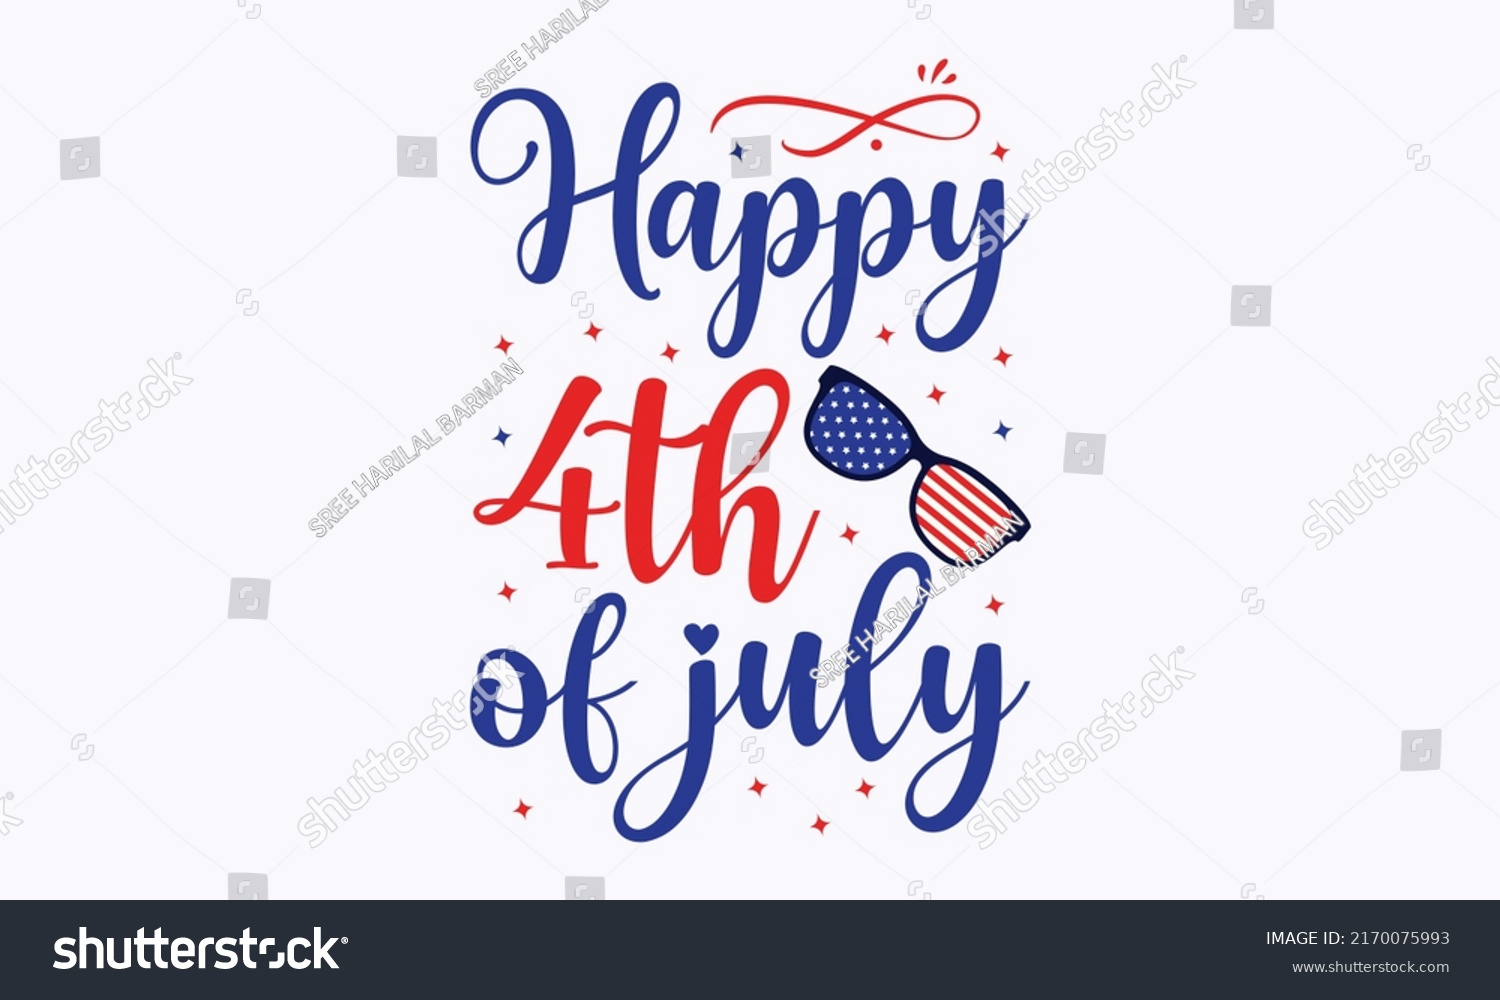 SVG of  happy 4th of july - 4th of July fireworks svg for design shirt and scrapbooking. Good for advertising, poster, announcement, invitation, Templet svg